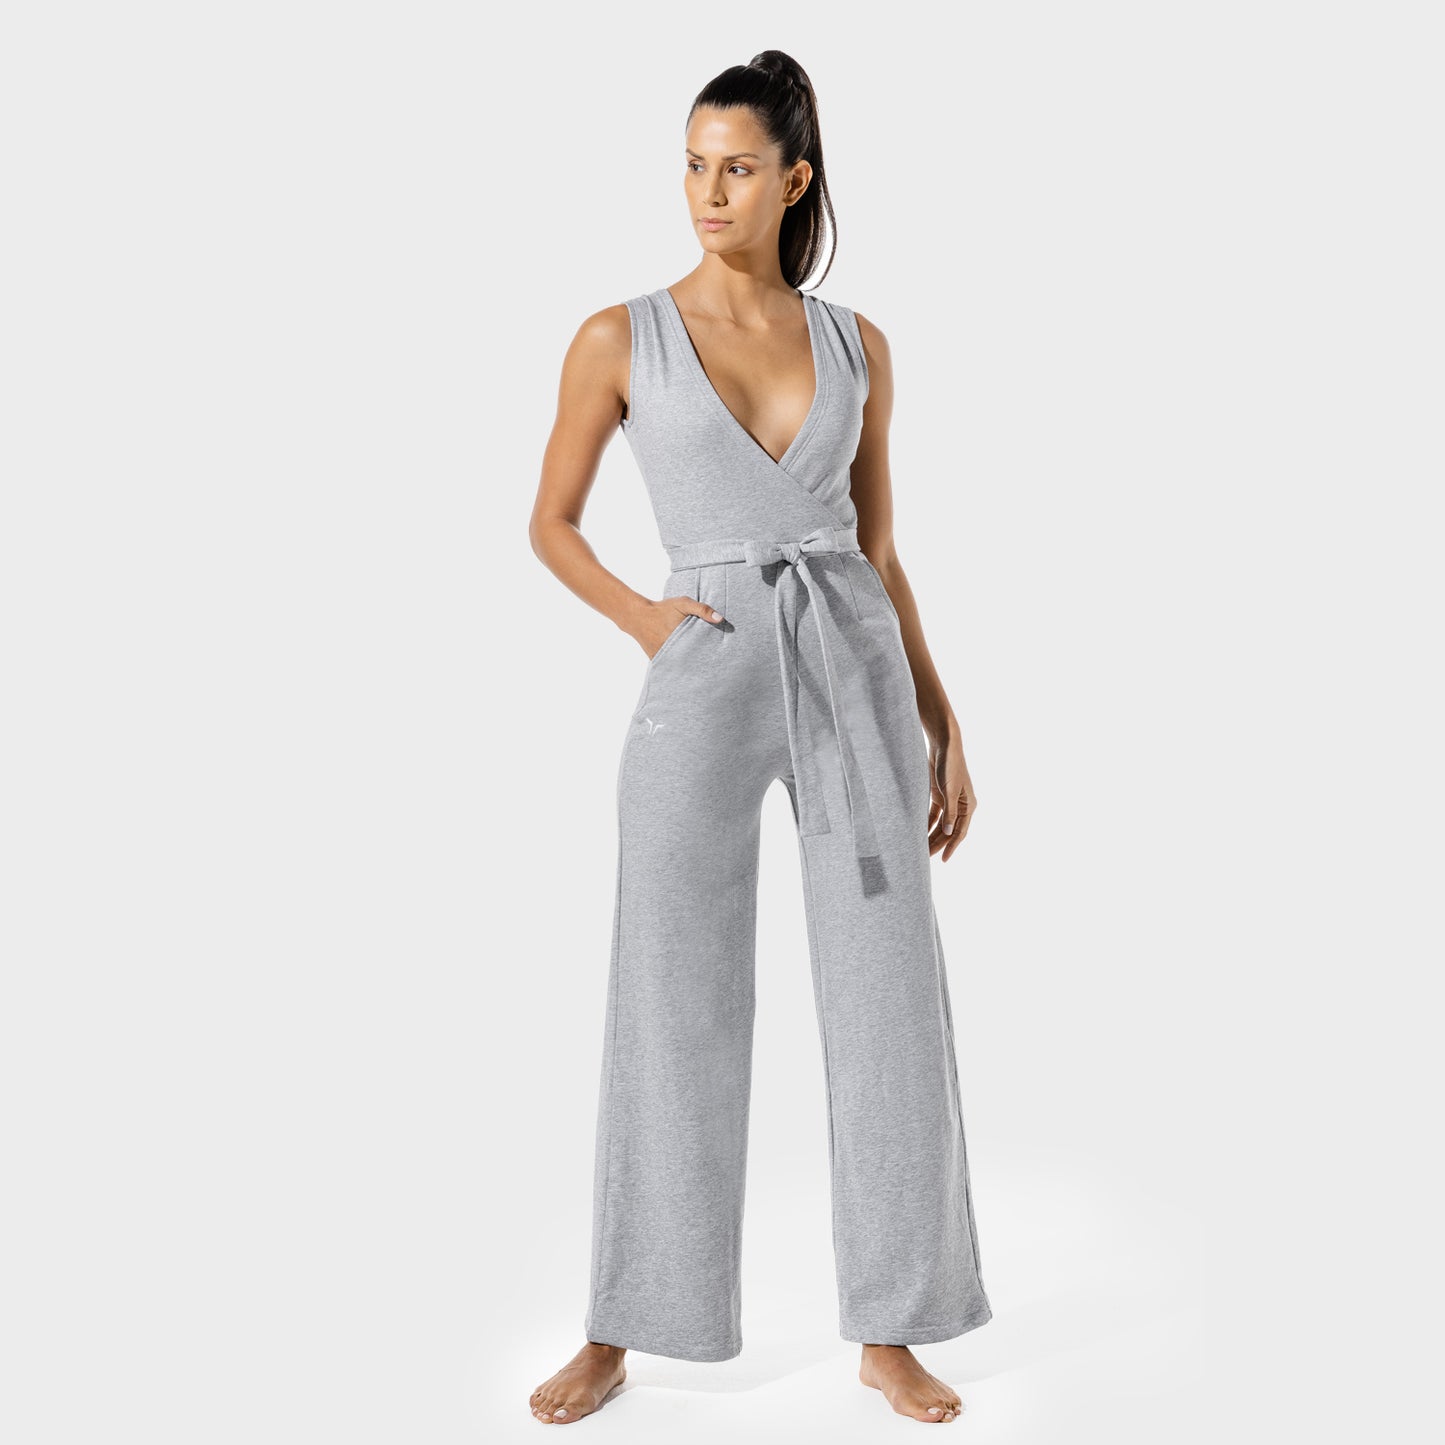 squatwolf-athletic-tops-womens-fitness-wrap-jumpsuit-grey-marl